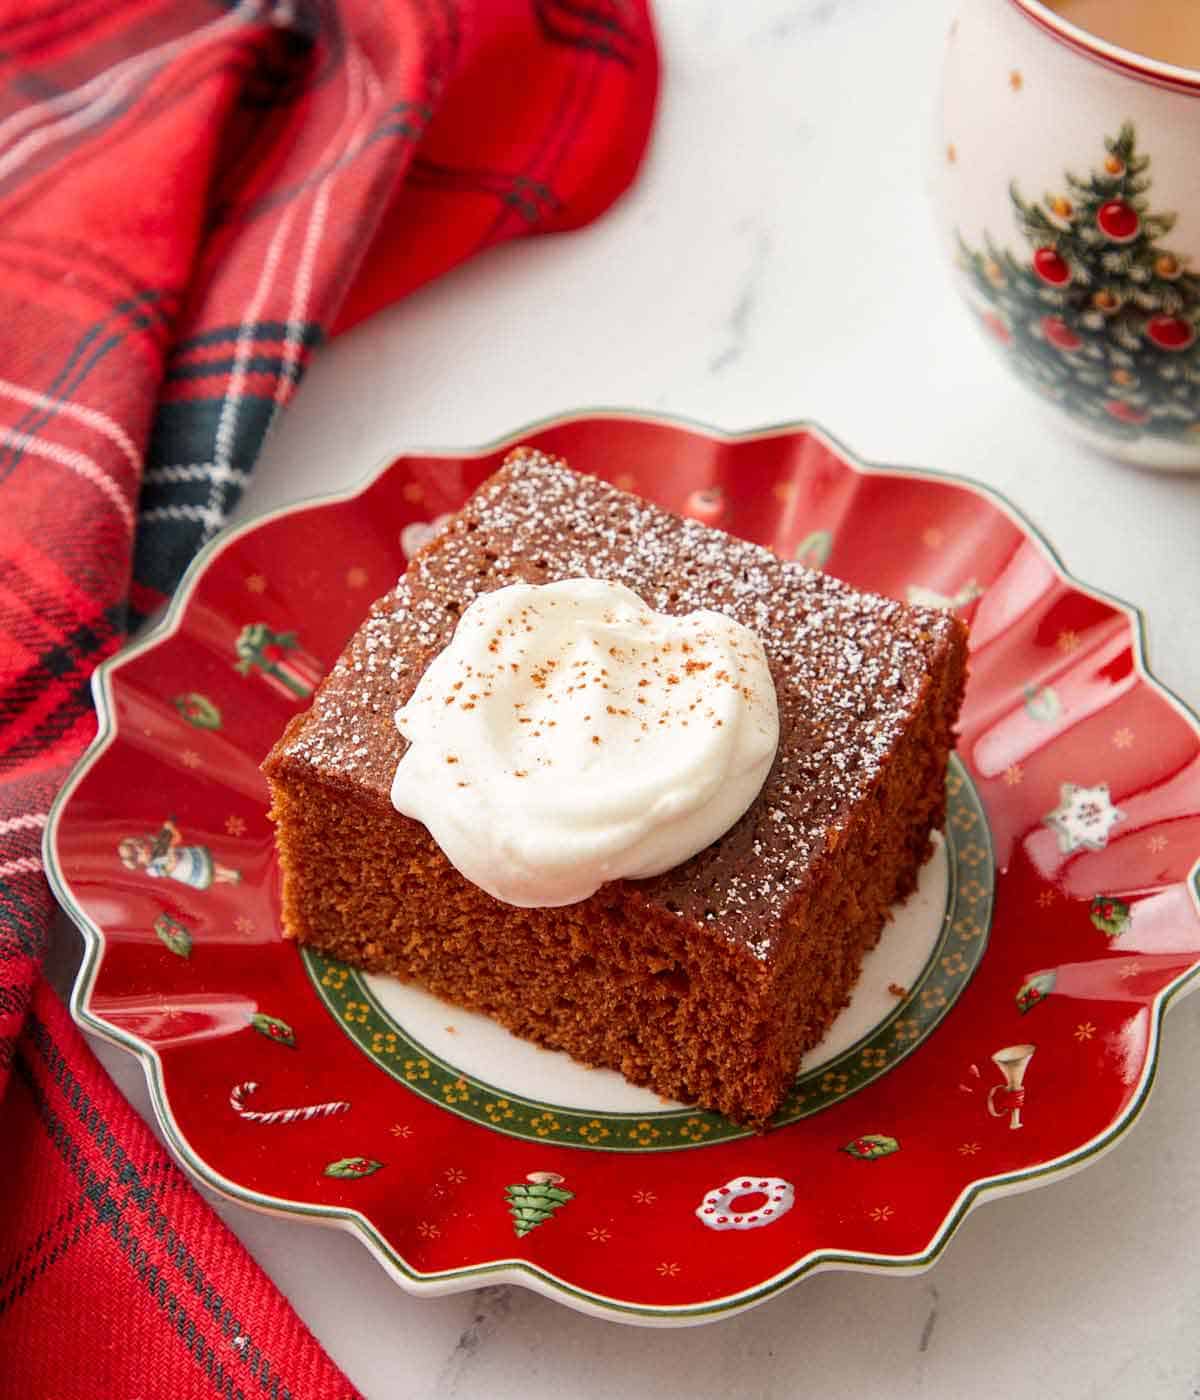 Overhead view of a festive red plate with a square slice of gingerbread cake with a dollop of whipped cream on top.